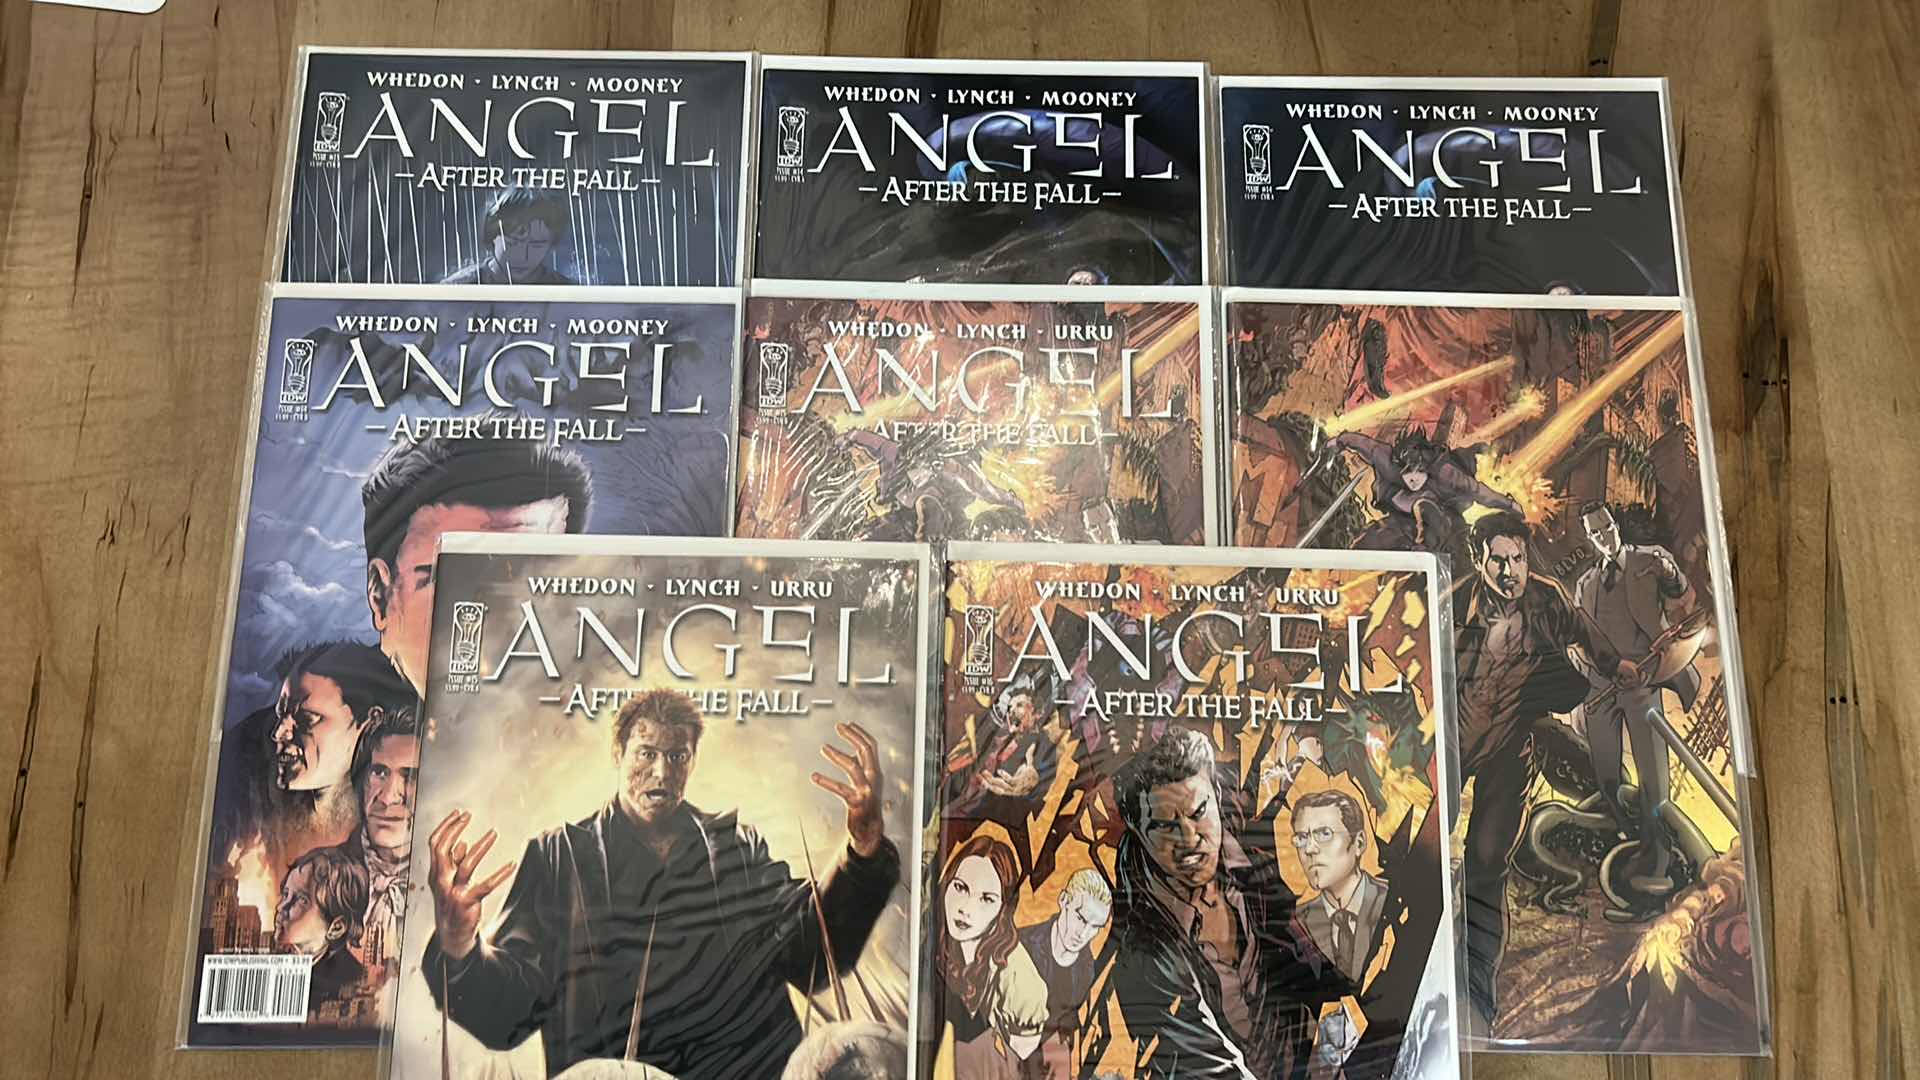 Photo 5 of 8 - ANGEL AFTER THE FALL COMIC BOOKS